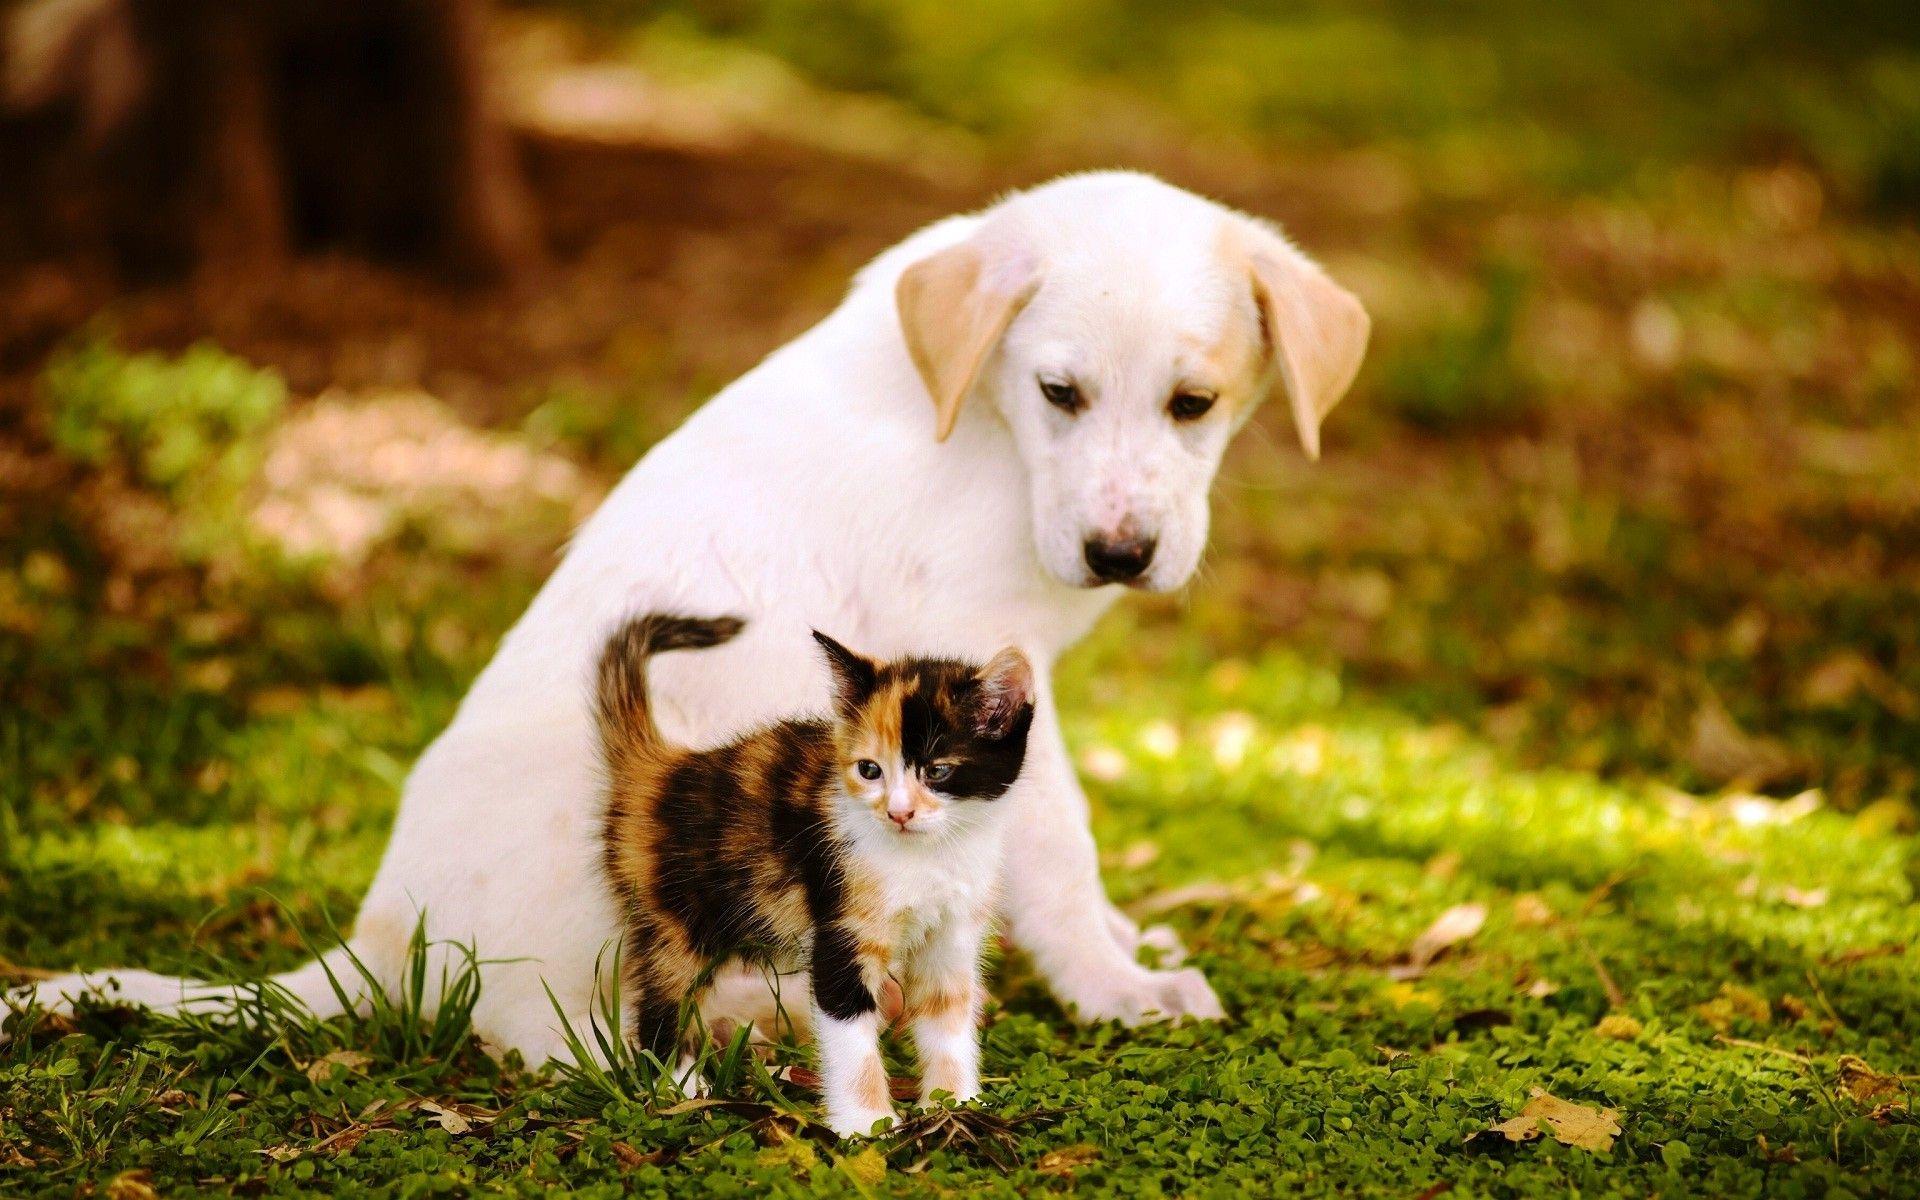 Cute Cats and Dogs Wallpapers - Top Free Cute Cats and Dogs Backgrounds